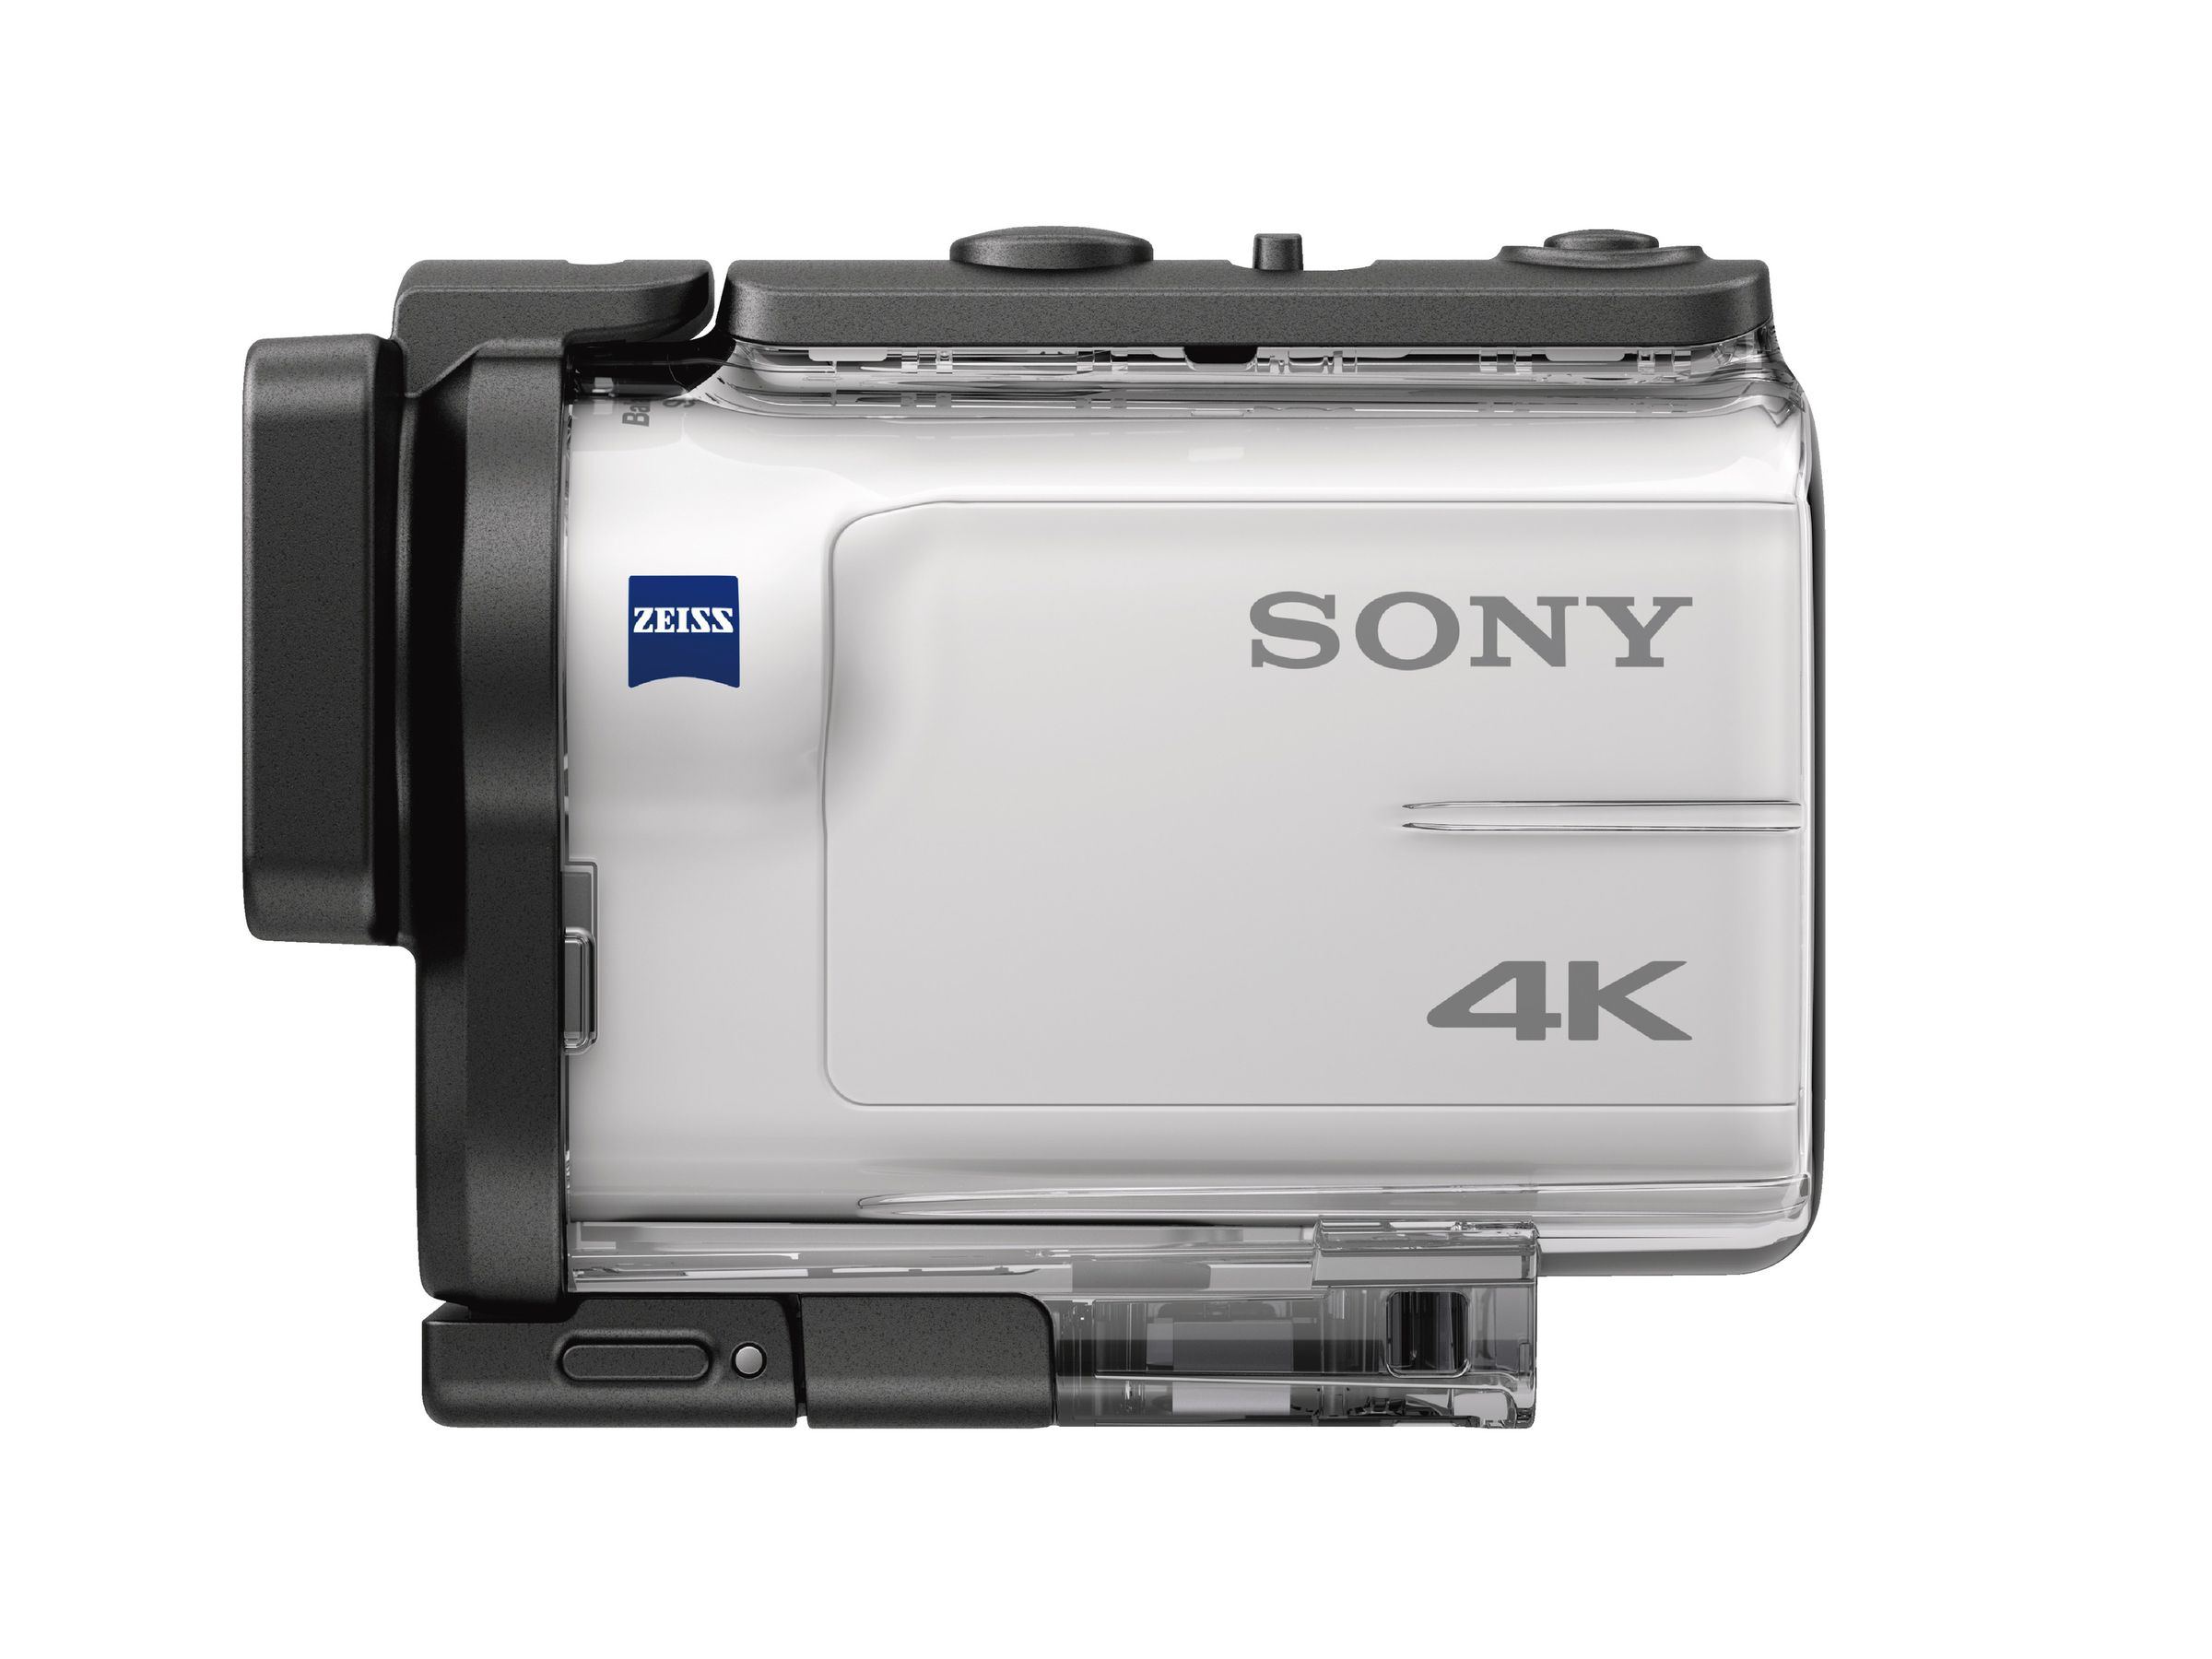 Sony's new 4K Action Cam in photos